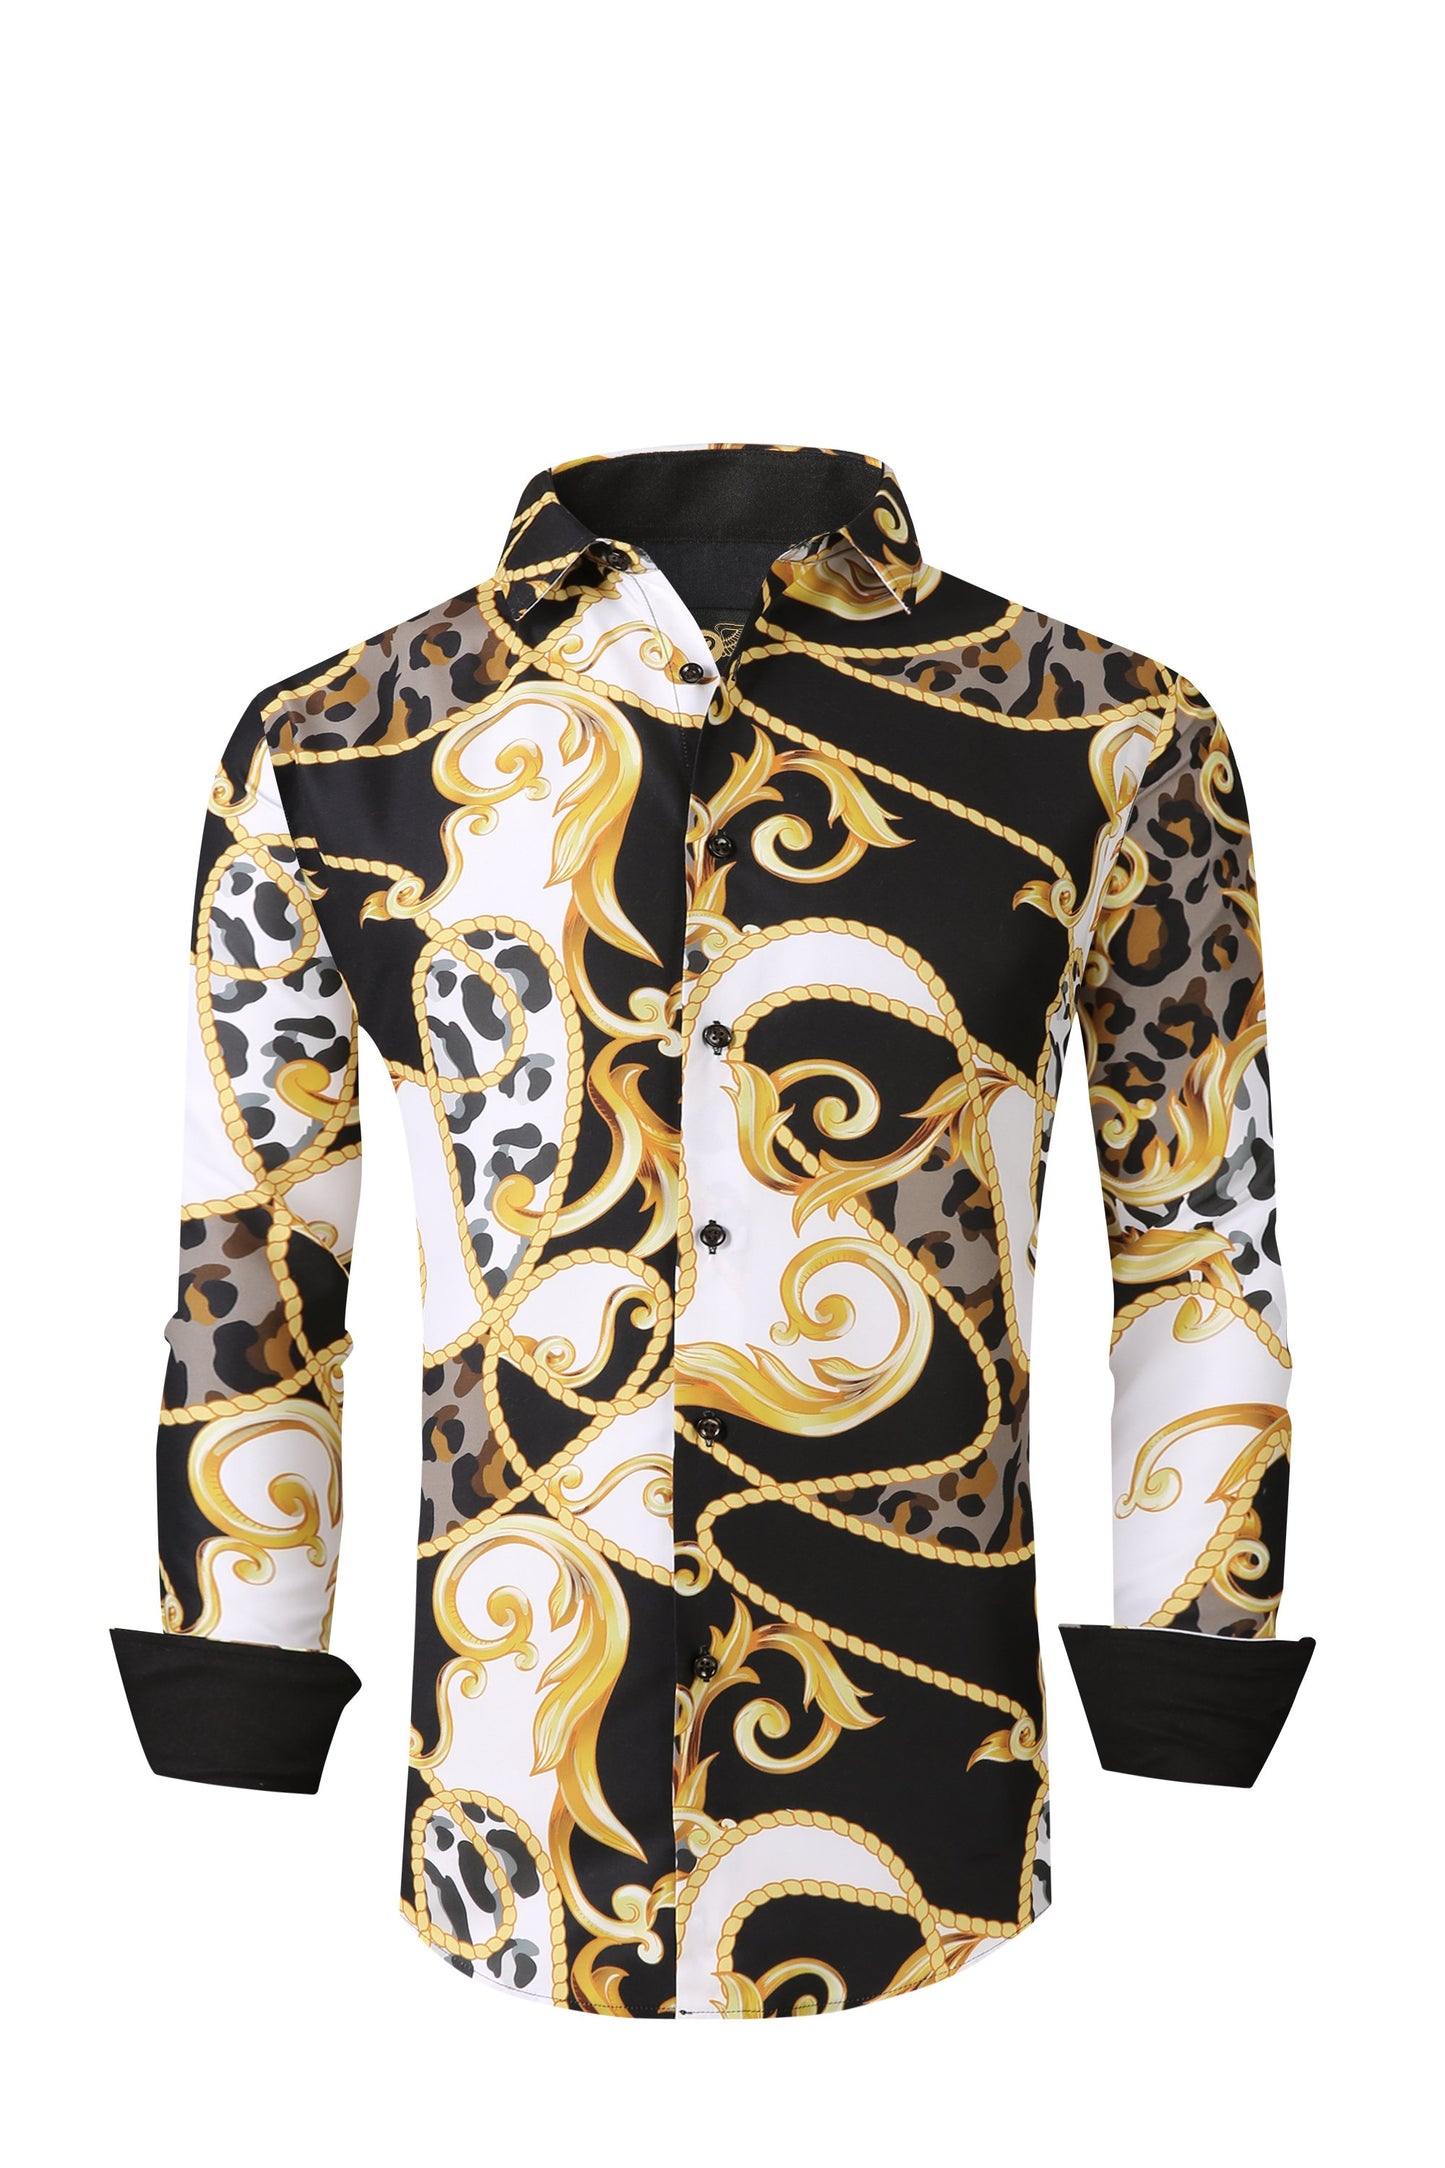 Mens PREMIERE Long Sleeve Button Down Dress Shirt White Black Gold Leaf Abstract